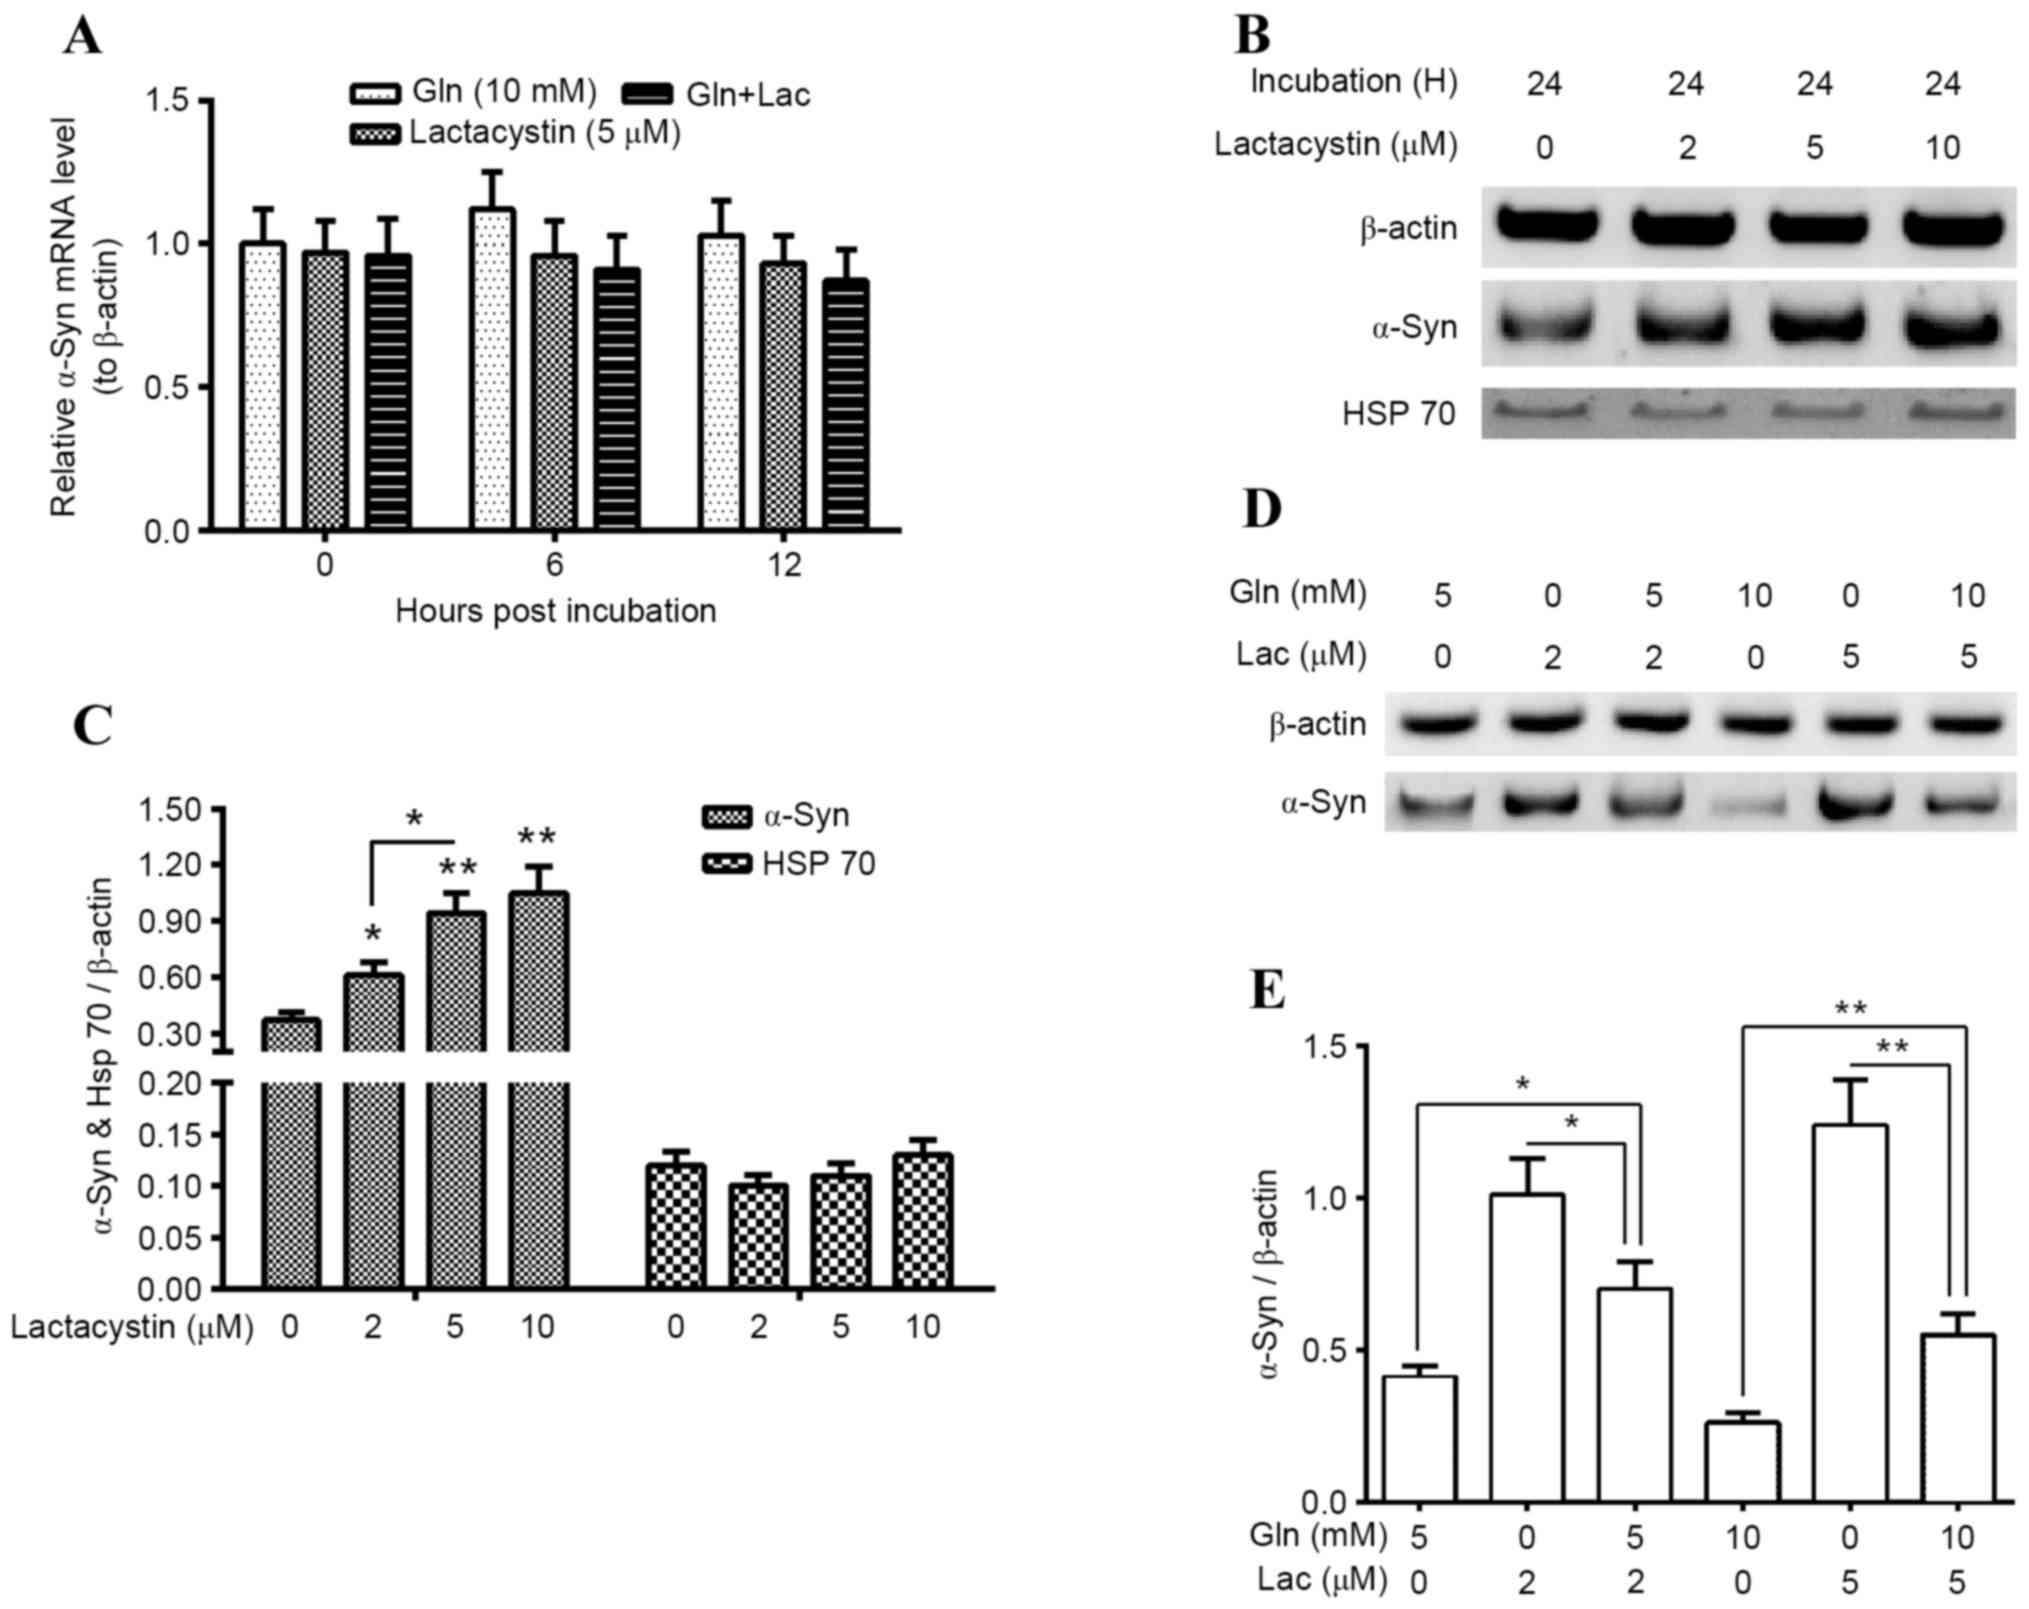 Glutamine Promotes Hsp70 And Inhibits A Synuclein Accumulation In Pheochromocytoma Pc12 Cells